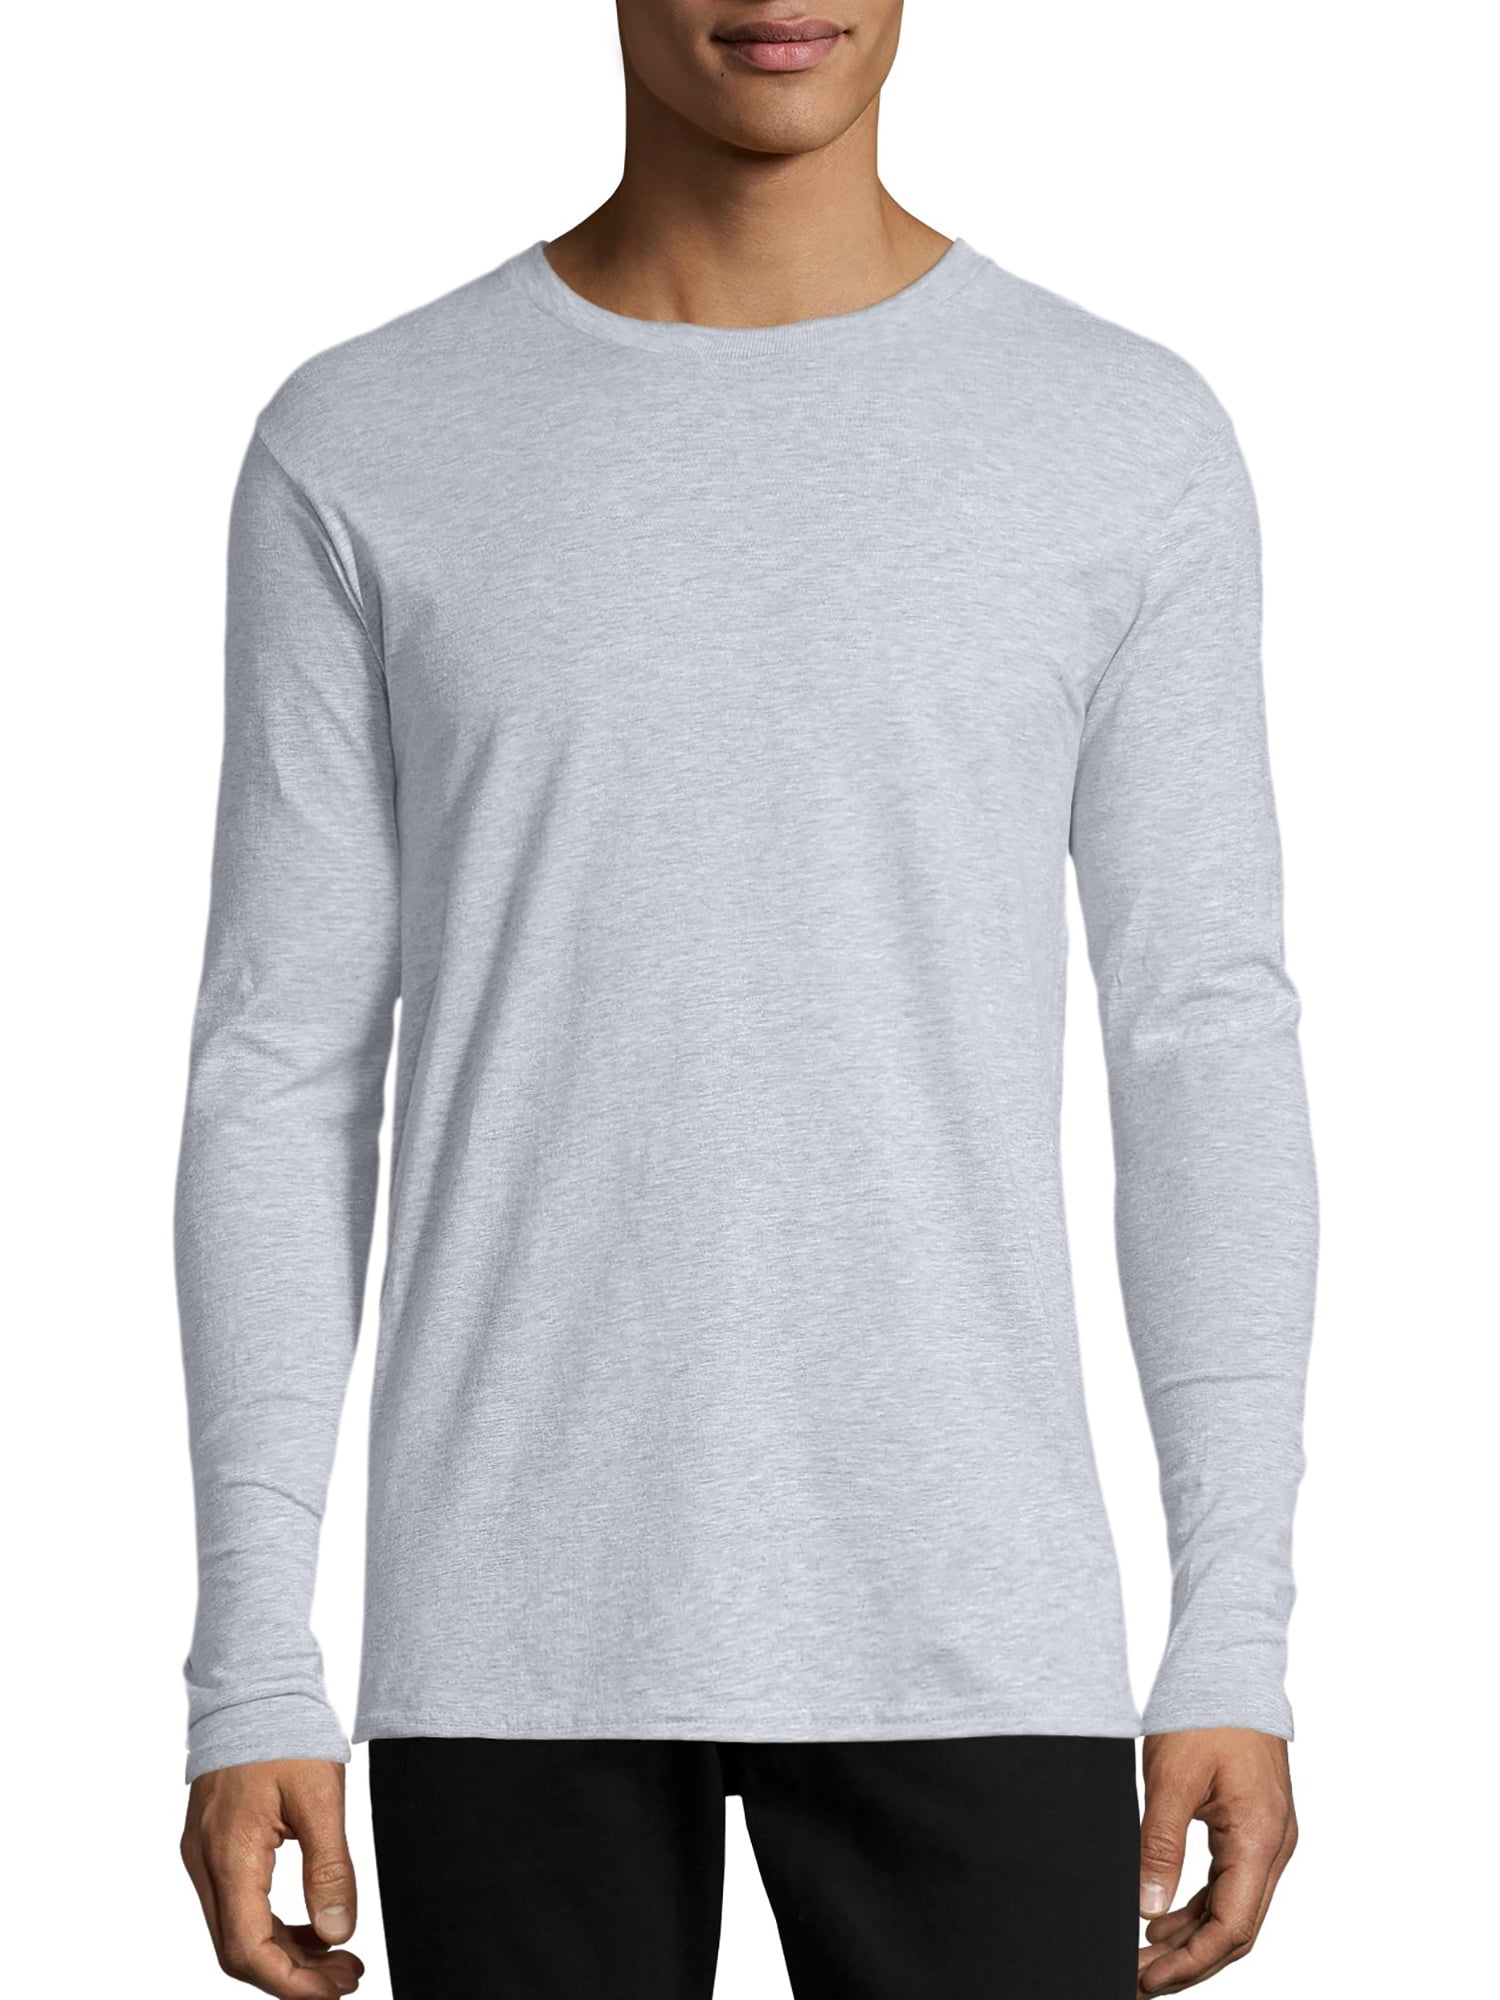 Coolred-Men Plus Size Leisure Pullover Stitch Crew Neck Long Sleeve Tees Top